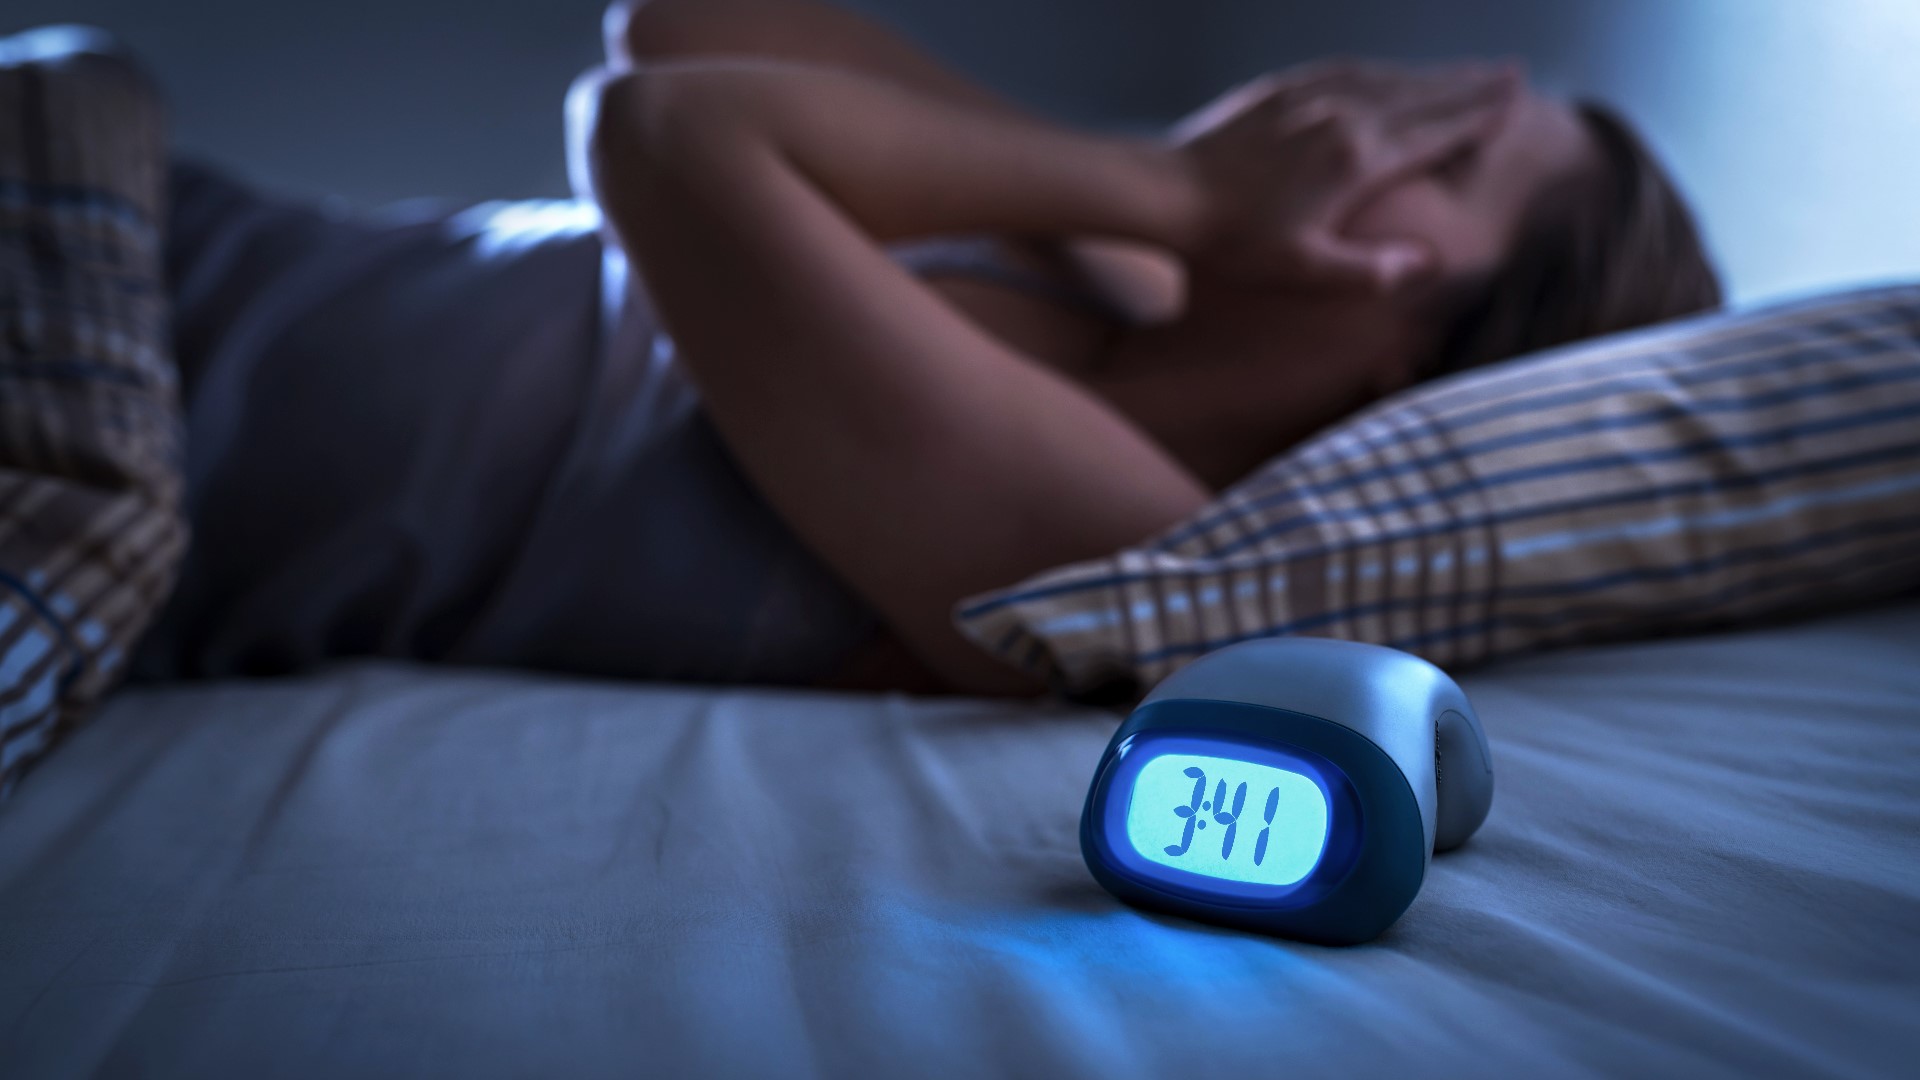 More people are having trouble sleeping as a result of the pandemic. Experts are calling the phenomenon "COVID-somnia," and they say there's an app that can help.